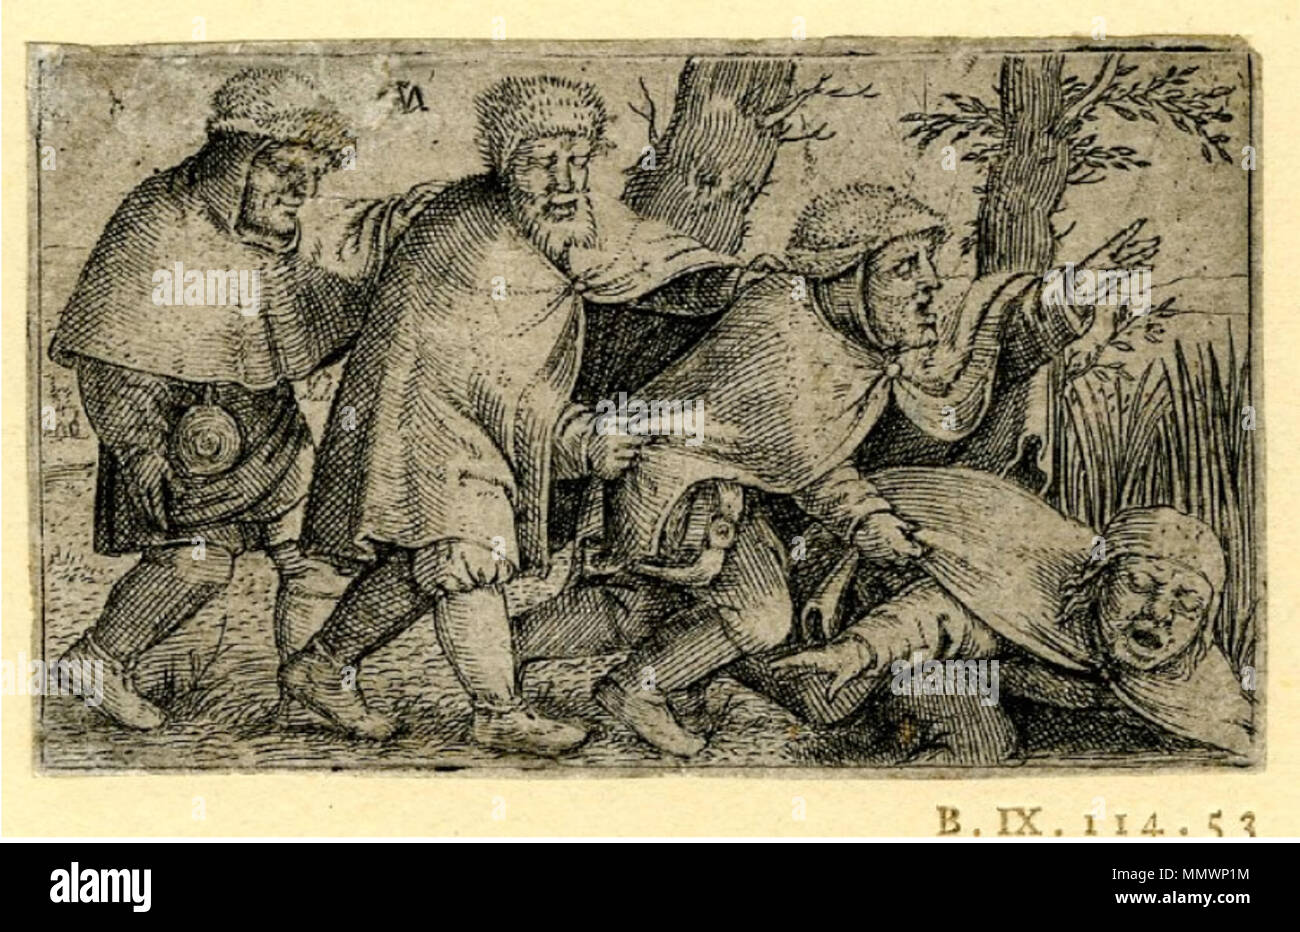 . English: Cornelis Massijs, Four blind peasants following one another in a line and the leader falling into a hole (allegory of the blind leading the blind), engraving, H: 45 millimetres, W: 76 millimetres, British Museum  . circa 1550.   Cornelis Massijs  (–1580)    Alternative names Cornelis Massys, Cornelis Matsijs, Cornelis Matsys, Cornelis Messijs, Cornelis Messys, Cornelis Metsijs, Cornelis Metsys  Description Flemish painter, draughtsman and printmaker  Date of birth/death circa 1510-1511 circa 1556-1557  Location of birth Antwerp  Work location Antwerp (1531)  Authority control  : Q21 Stock Photo